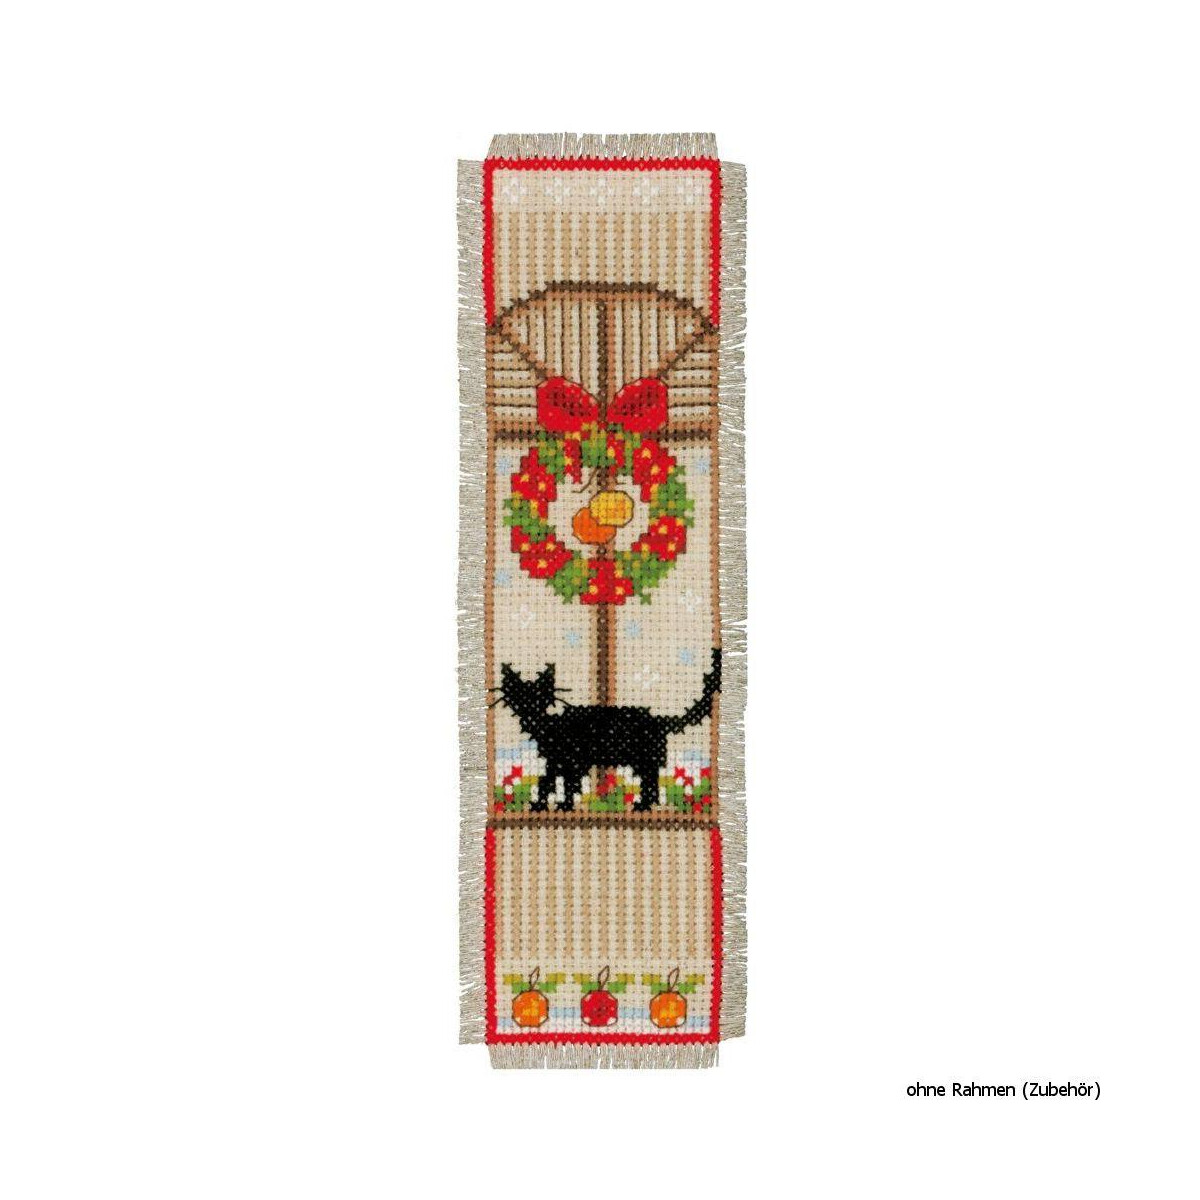 Vervaco Bookmark counted cross stitch kit Christmas...